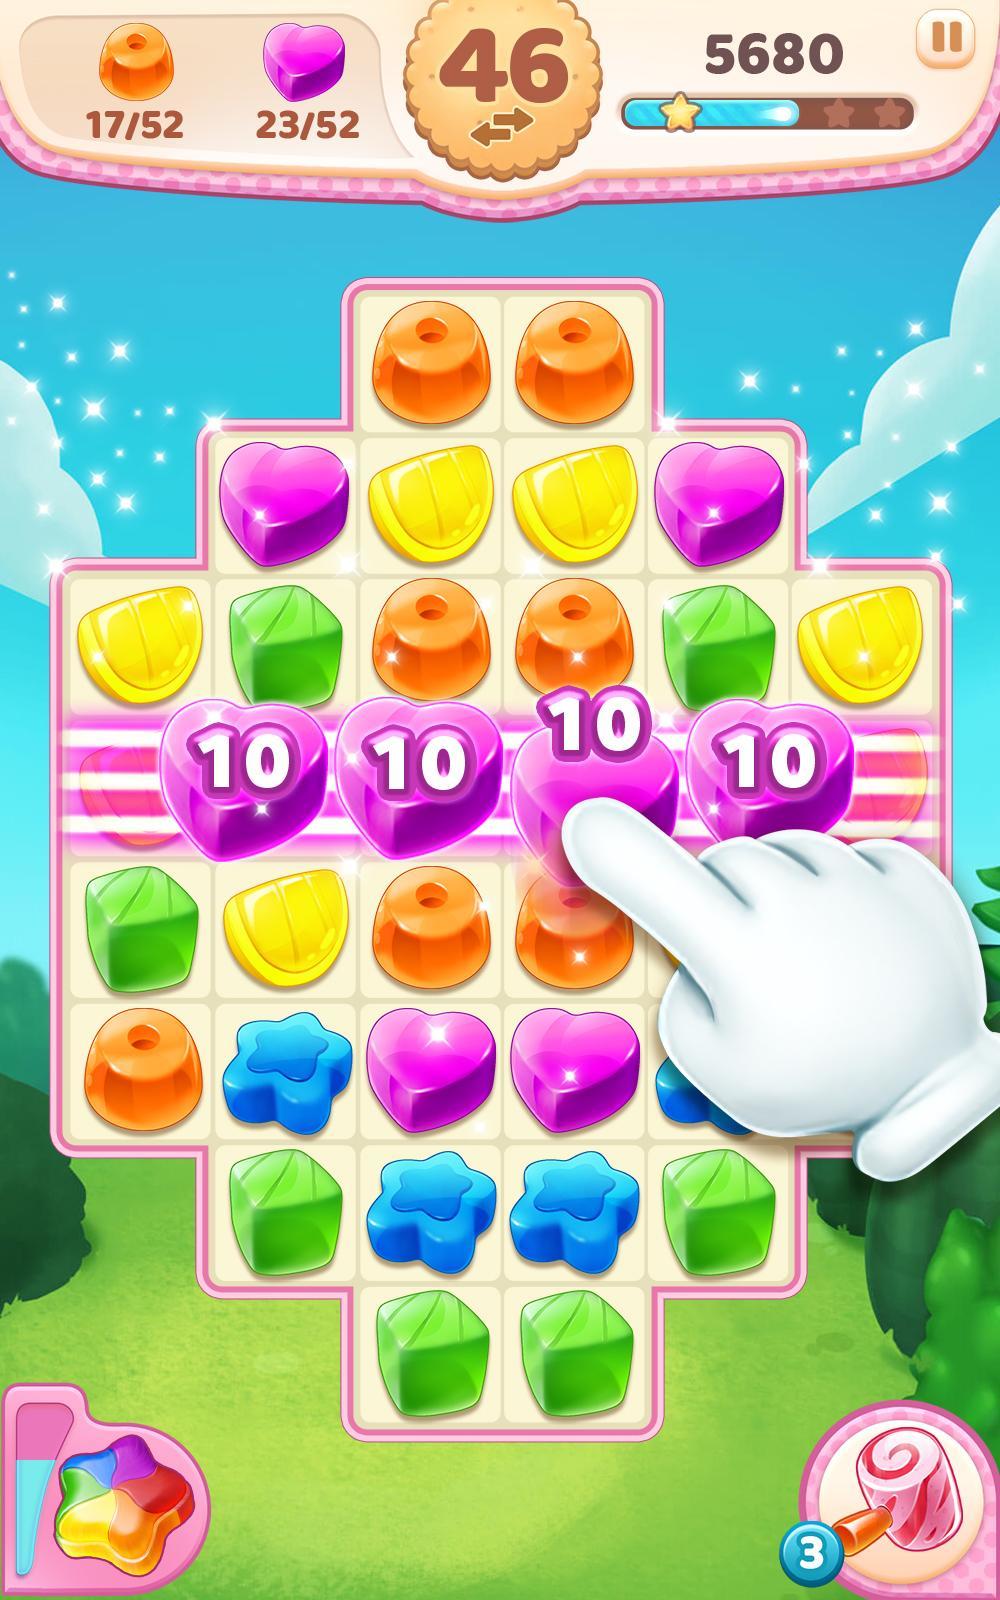 Screenshot 1 of Candy Stars Puzzle 1.1.5